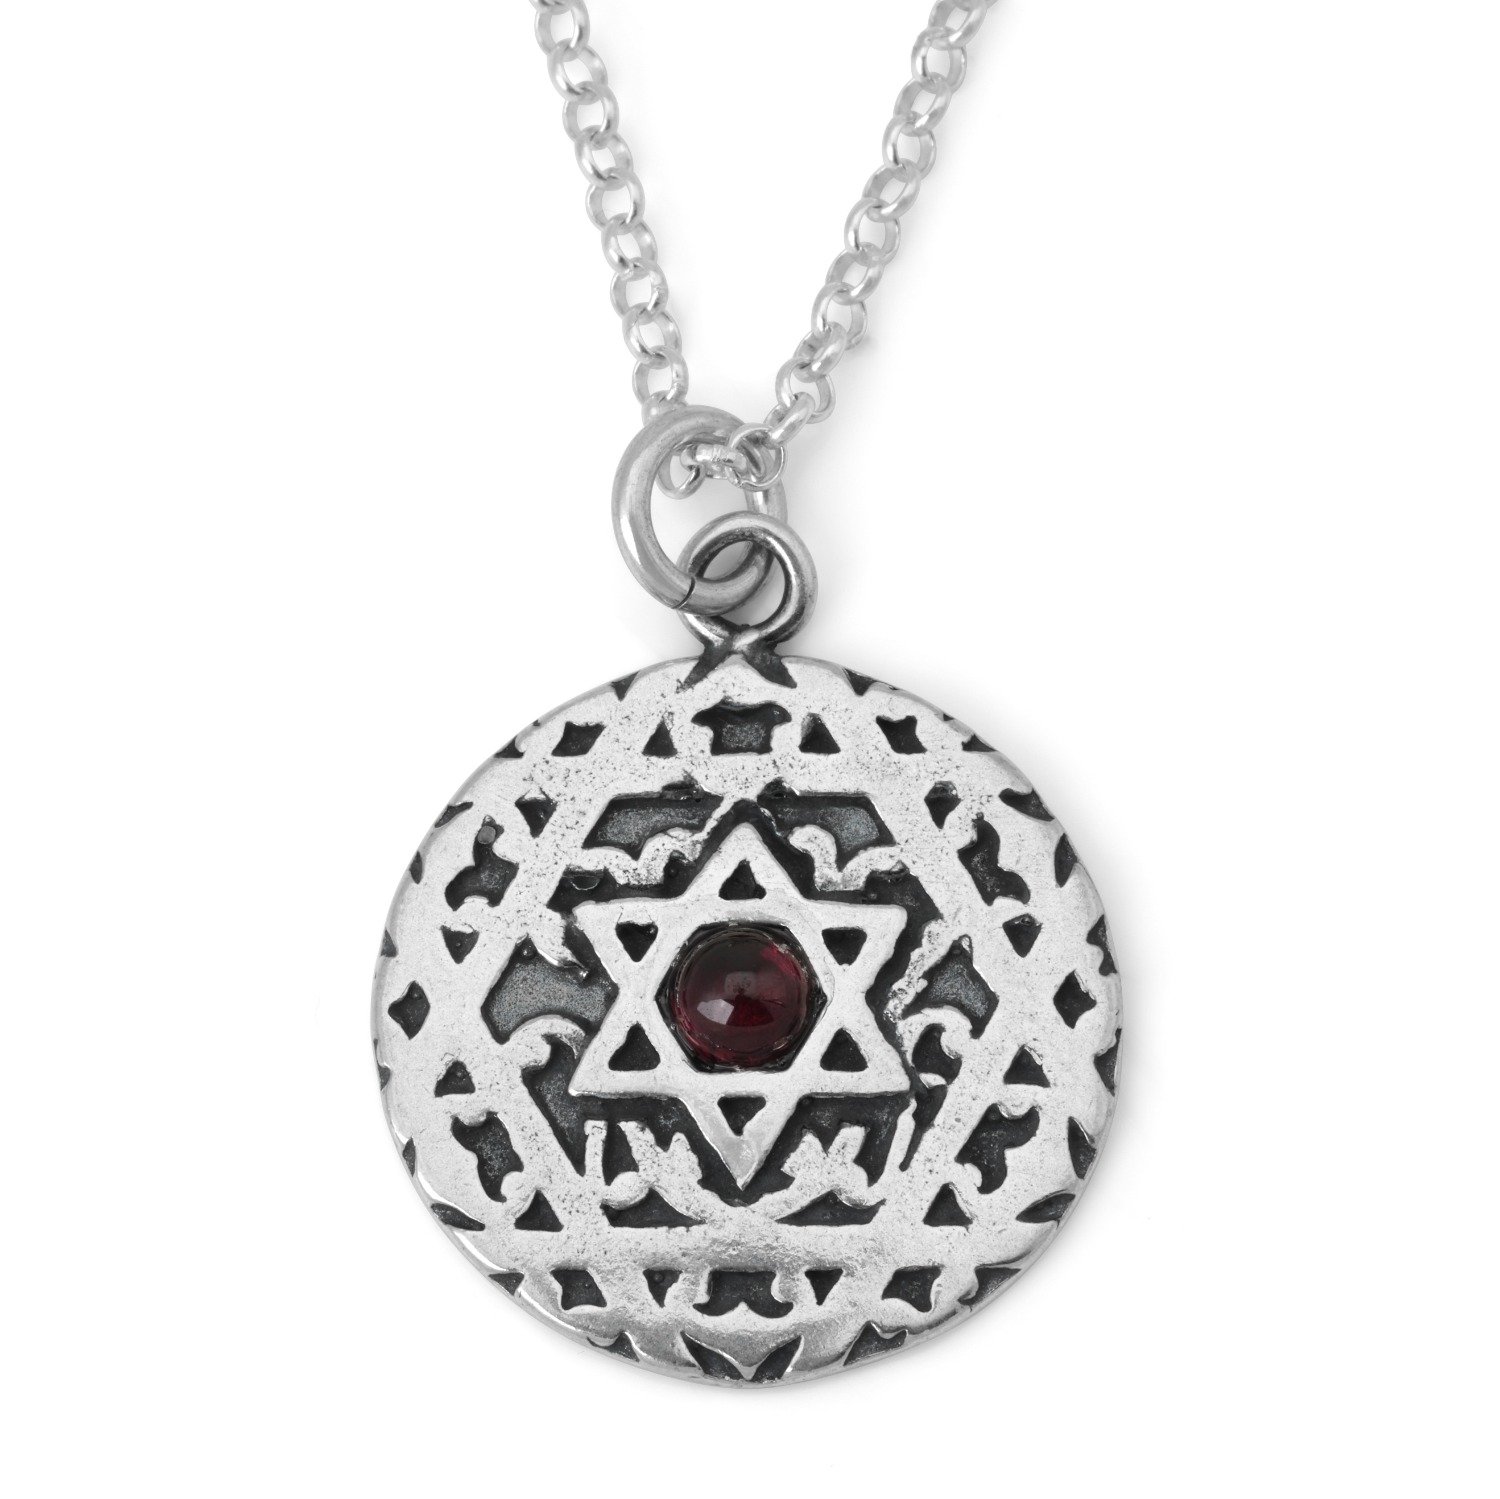 Kabbalistic Priestly Blessing: Silver Filigree Star of David Necklace with Garnet Stone - 1